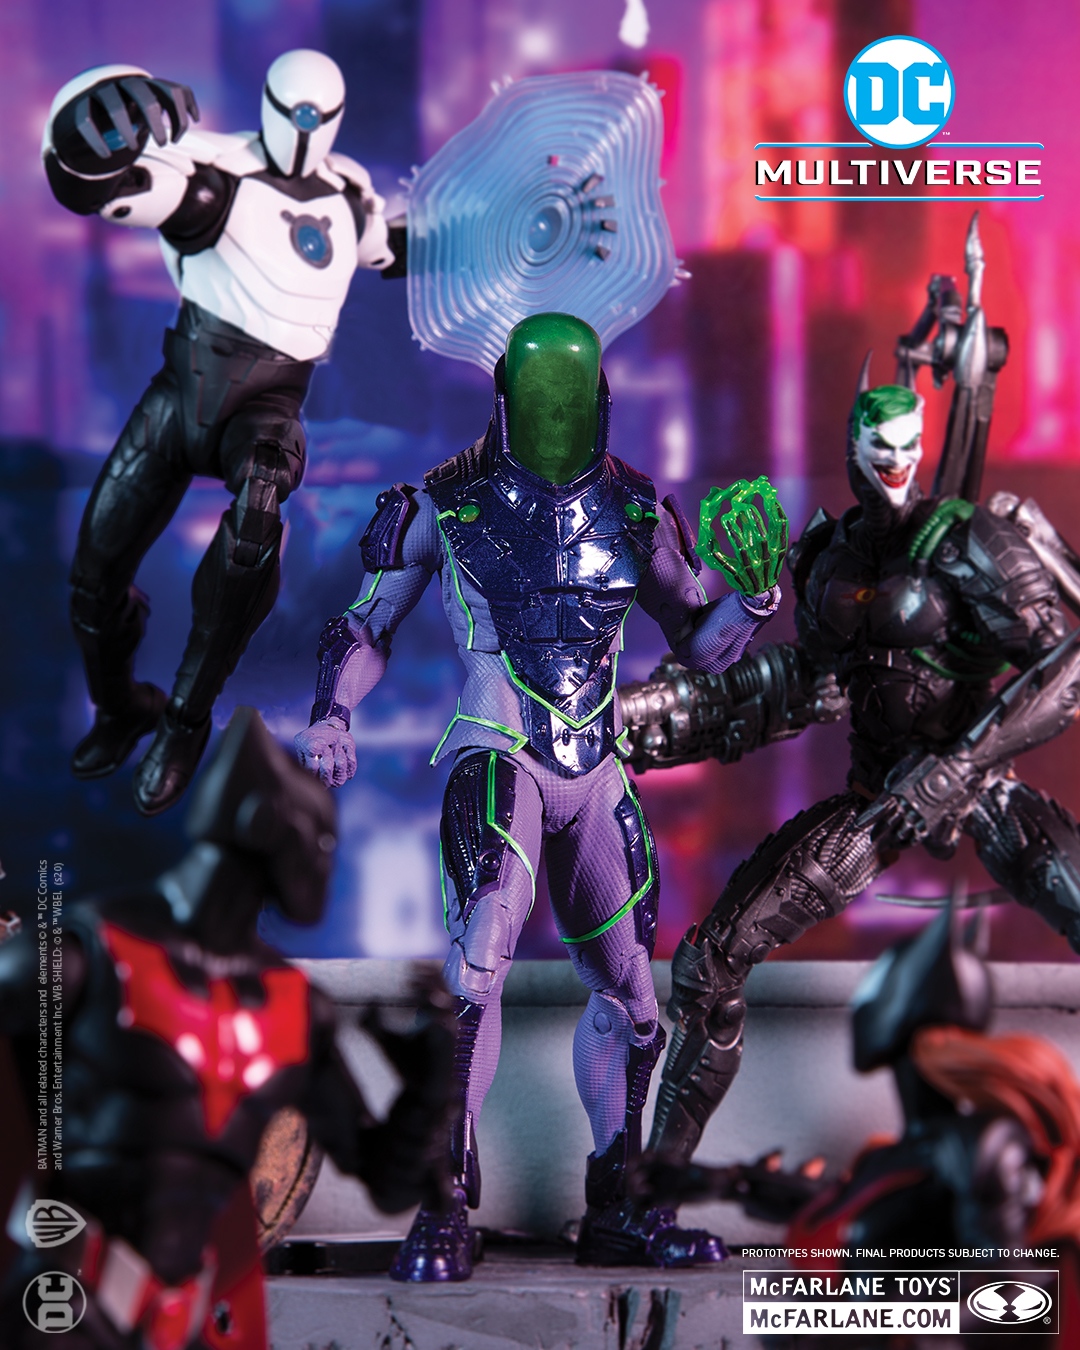 IN STOCK McFarlane DC Multiverse BATMAN BEYOND: FUTURES END BUILD-A-FIGURE  Jokerbot action figures set - Dragon's Chest Toys and Collectibles